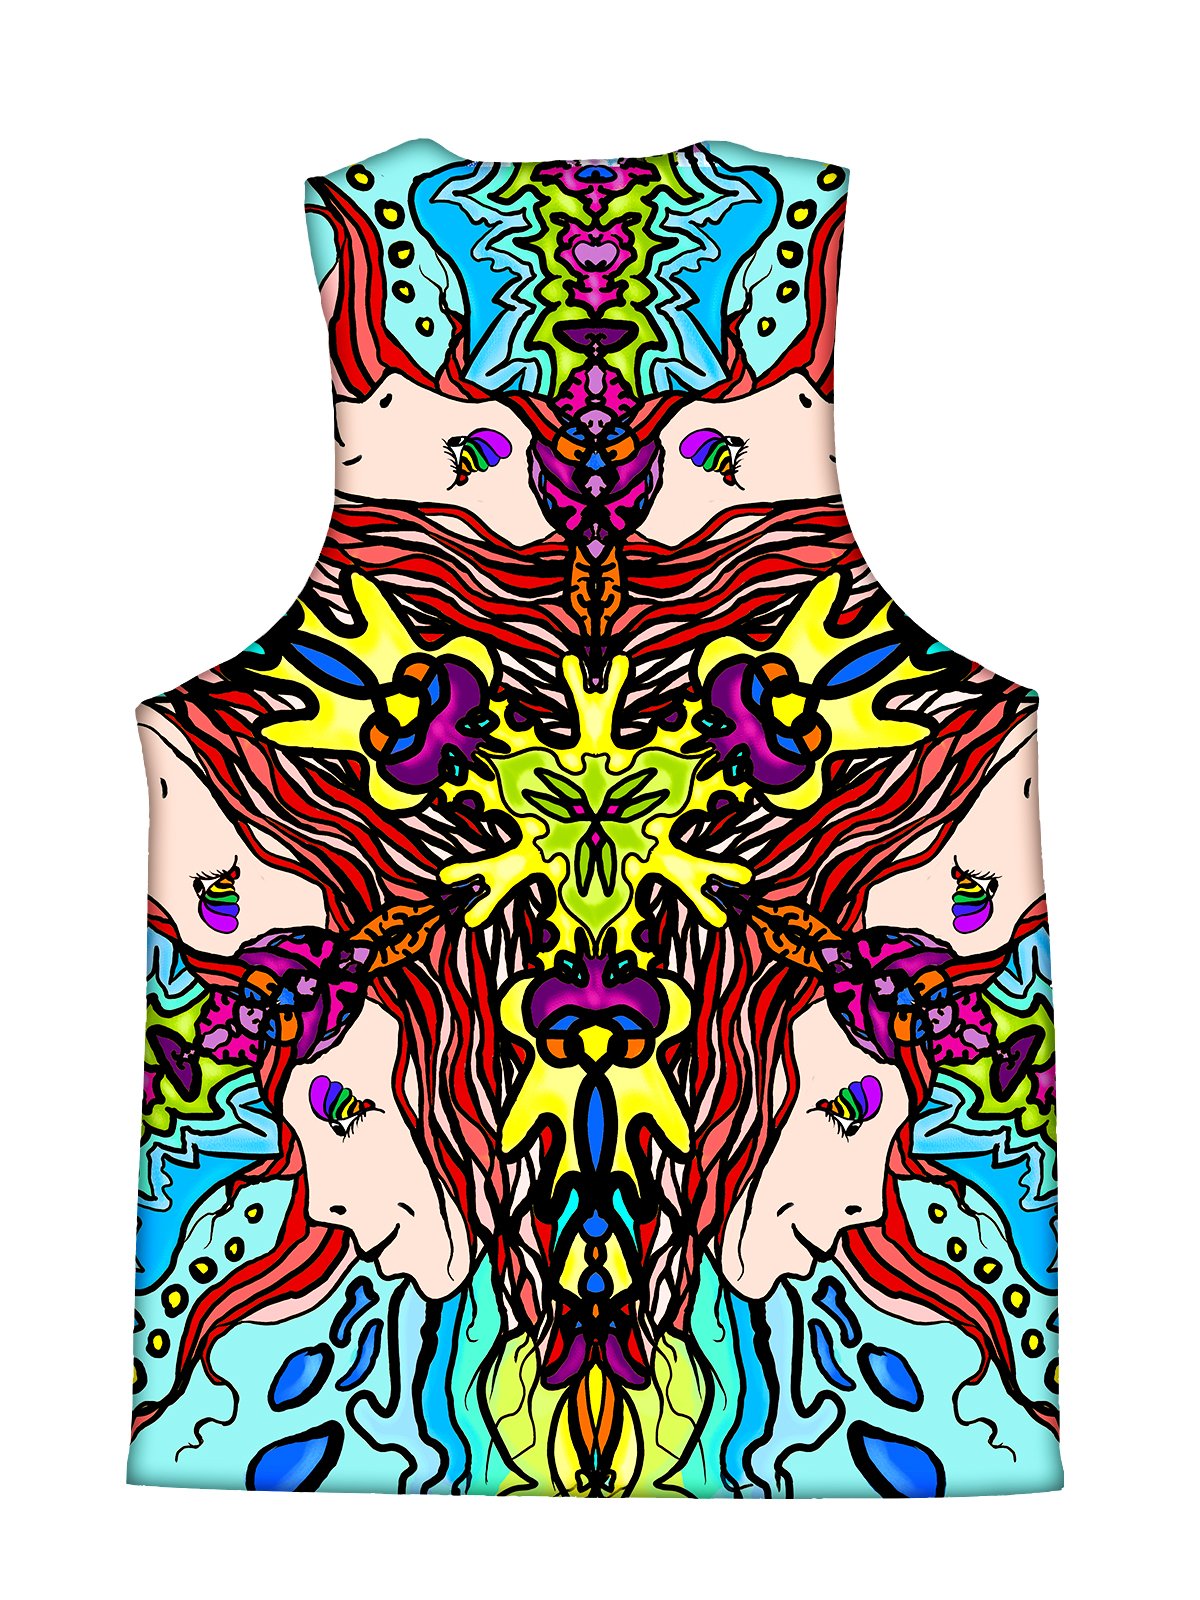 Psychedelic all over print sacred geometry inspired tank by GratefullyDyed Apparel back view.